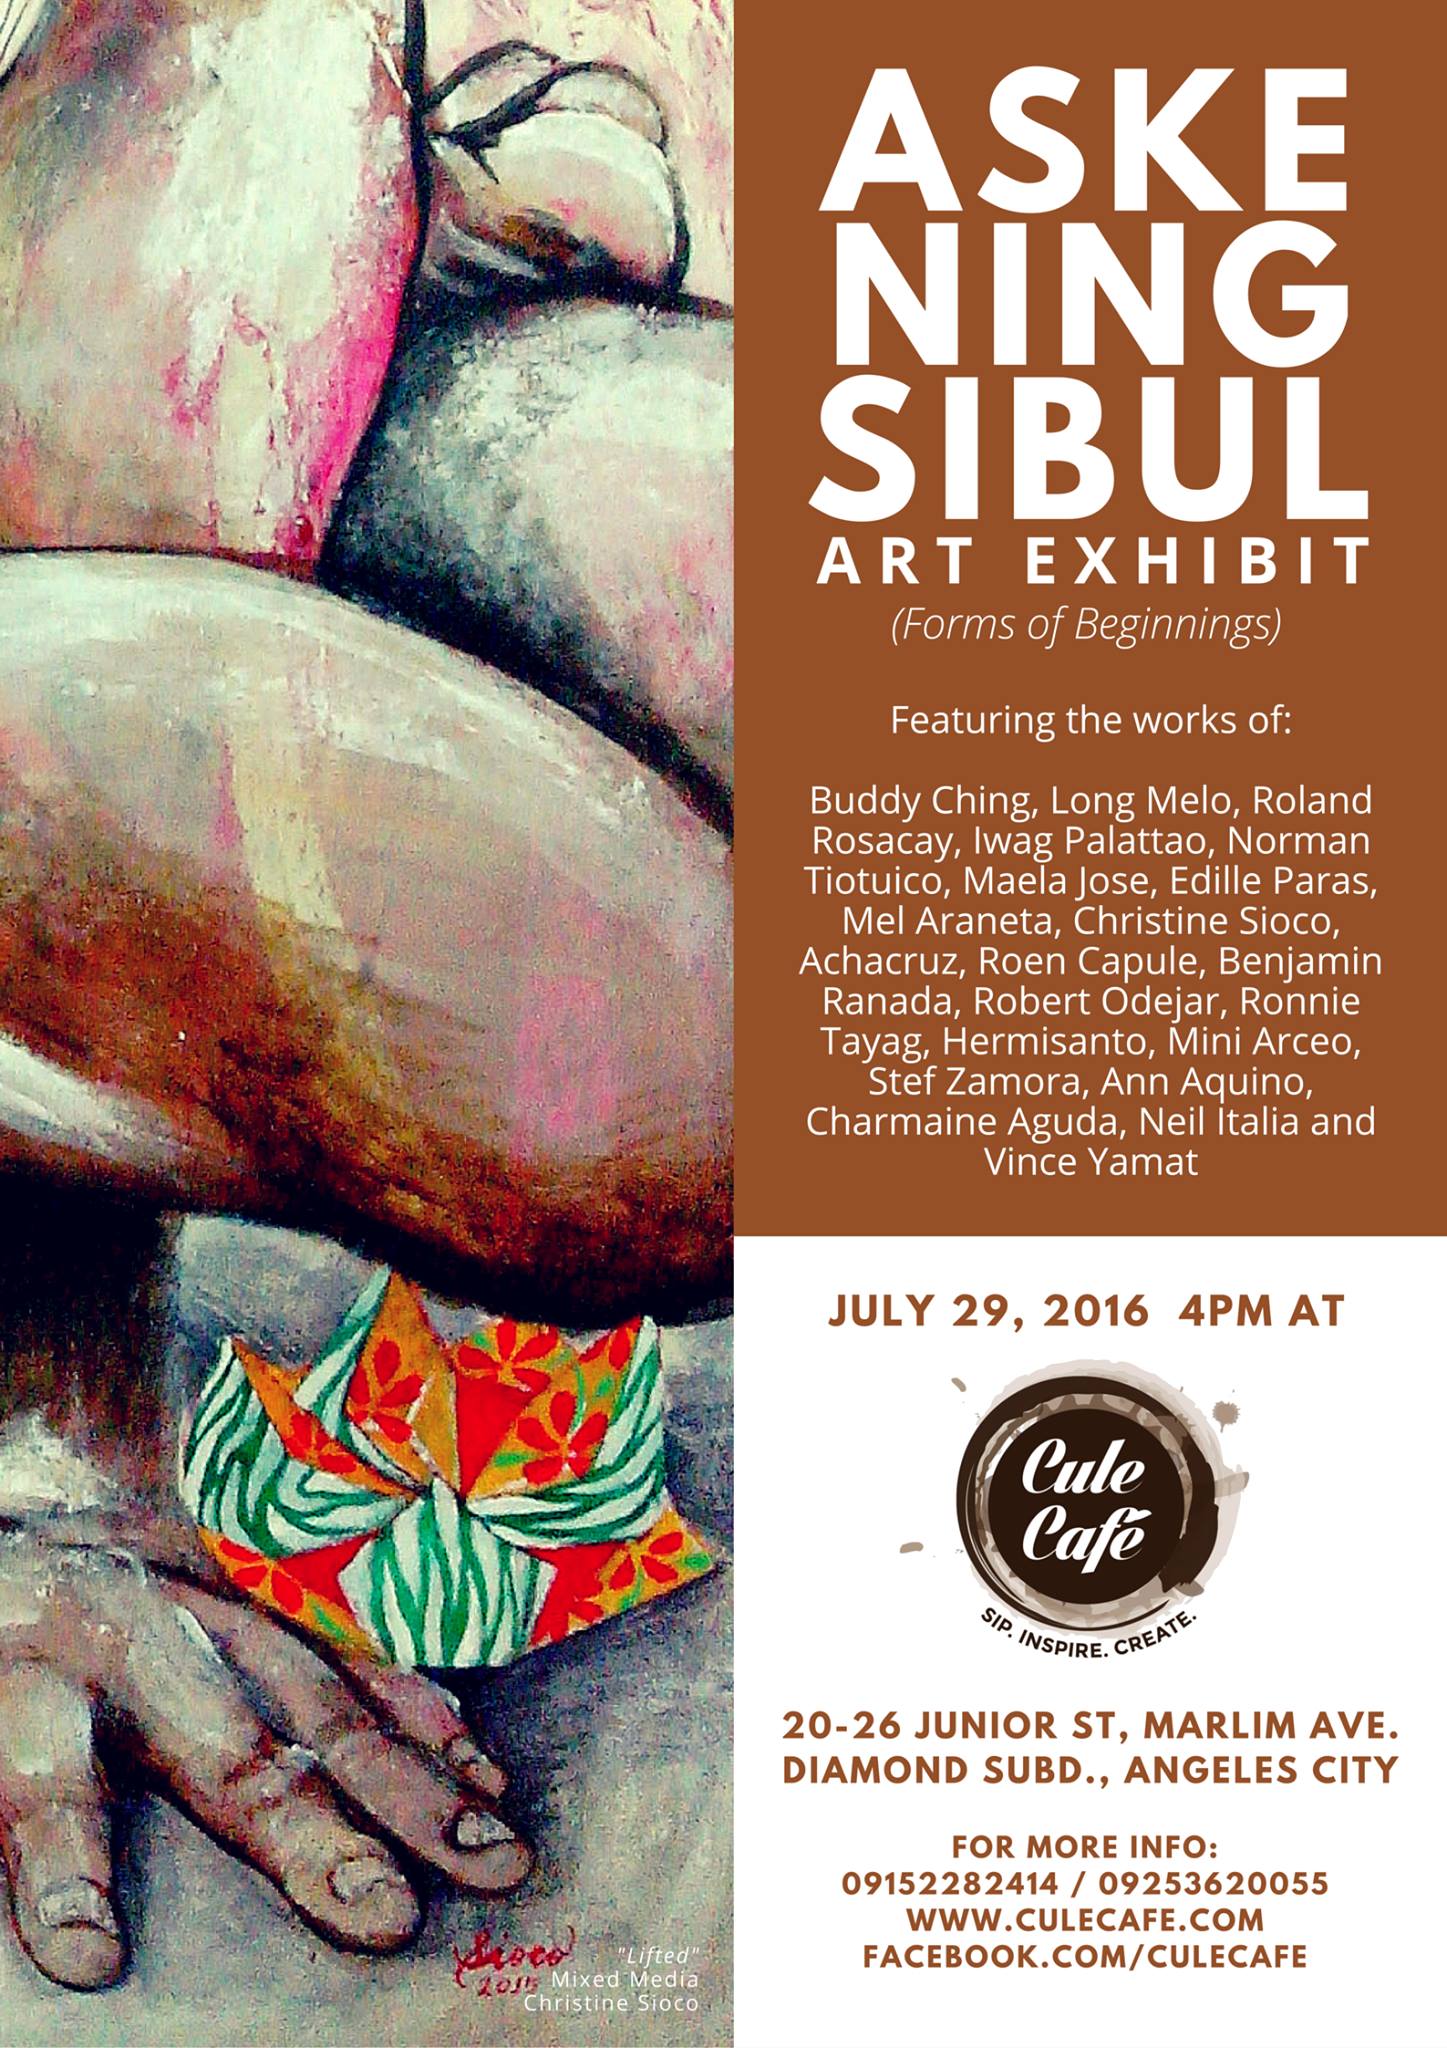 Cule Cafe Page Liked · July 11 · Save the date! Aske Ning Sibul Art Exhibition at Cule Cafe July 29, 2016 - 4 PM — with Mel Araneta, Cristy Smile, Angelo Melo and 47 others.